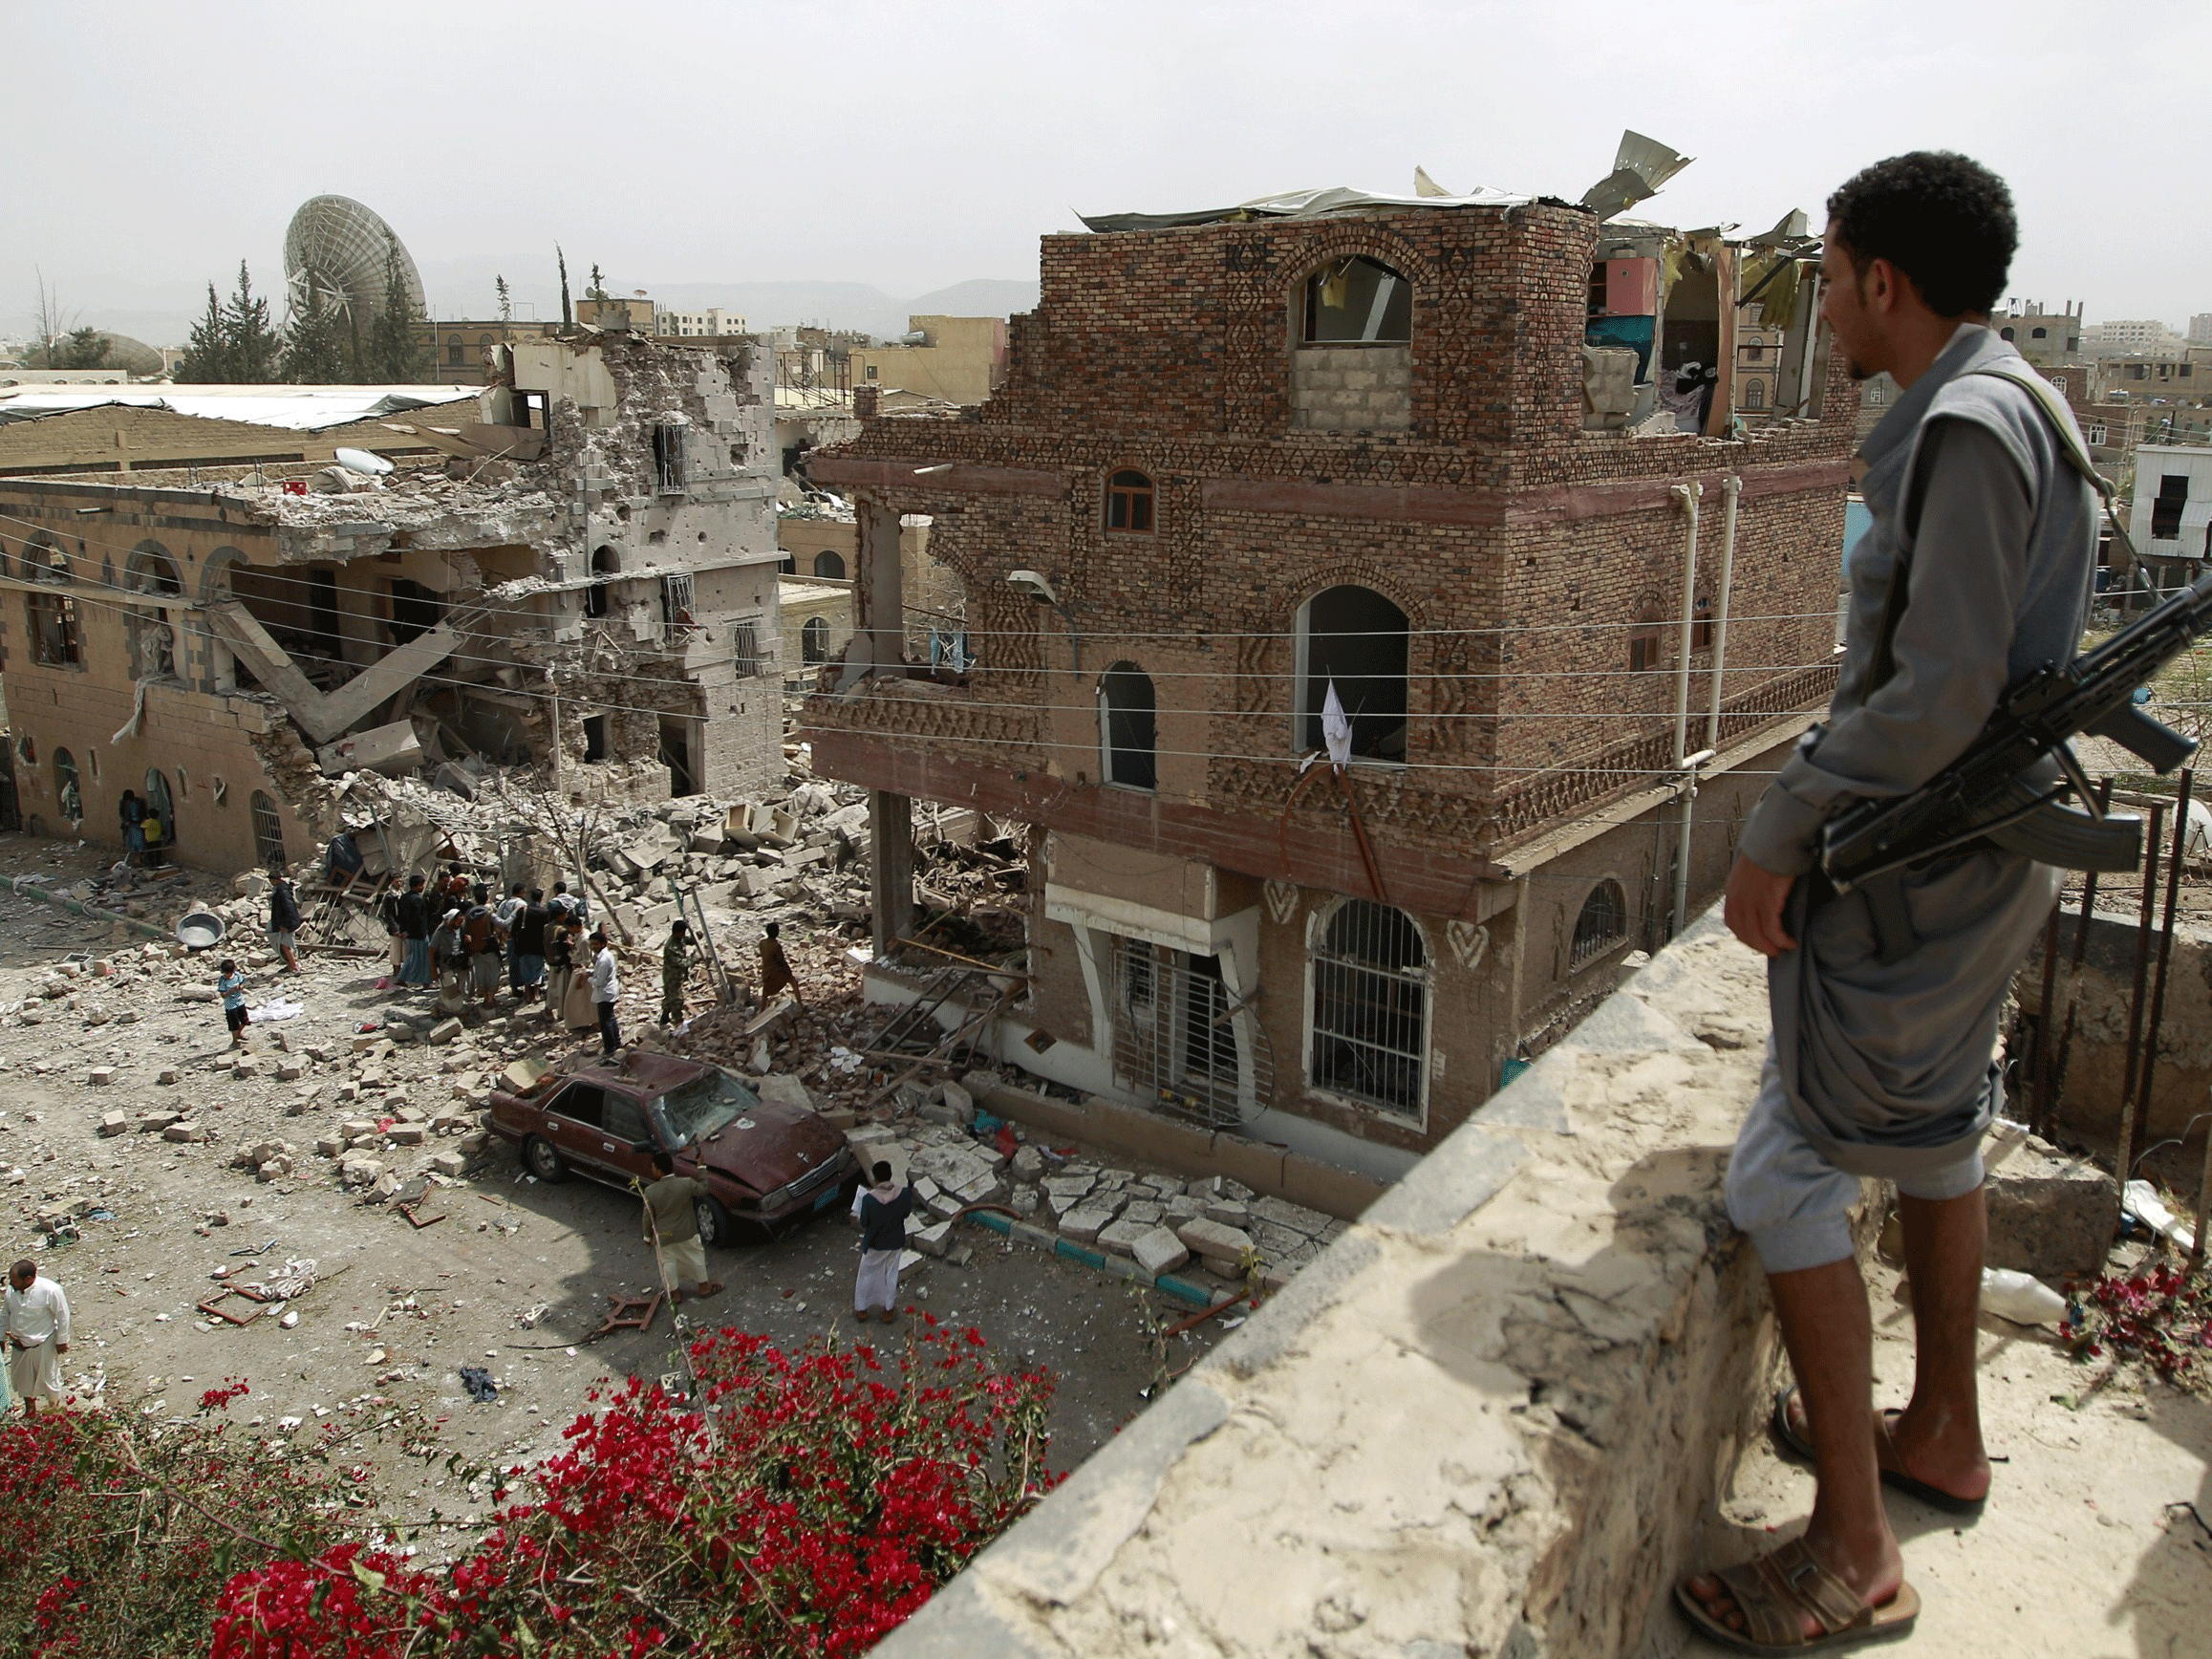 A Huthi militant watches from the roof of a building as people inspect the debris of a house destroyed in an air-strike by the Saudi-led coalition on the capital of Sanaa